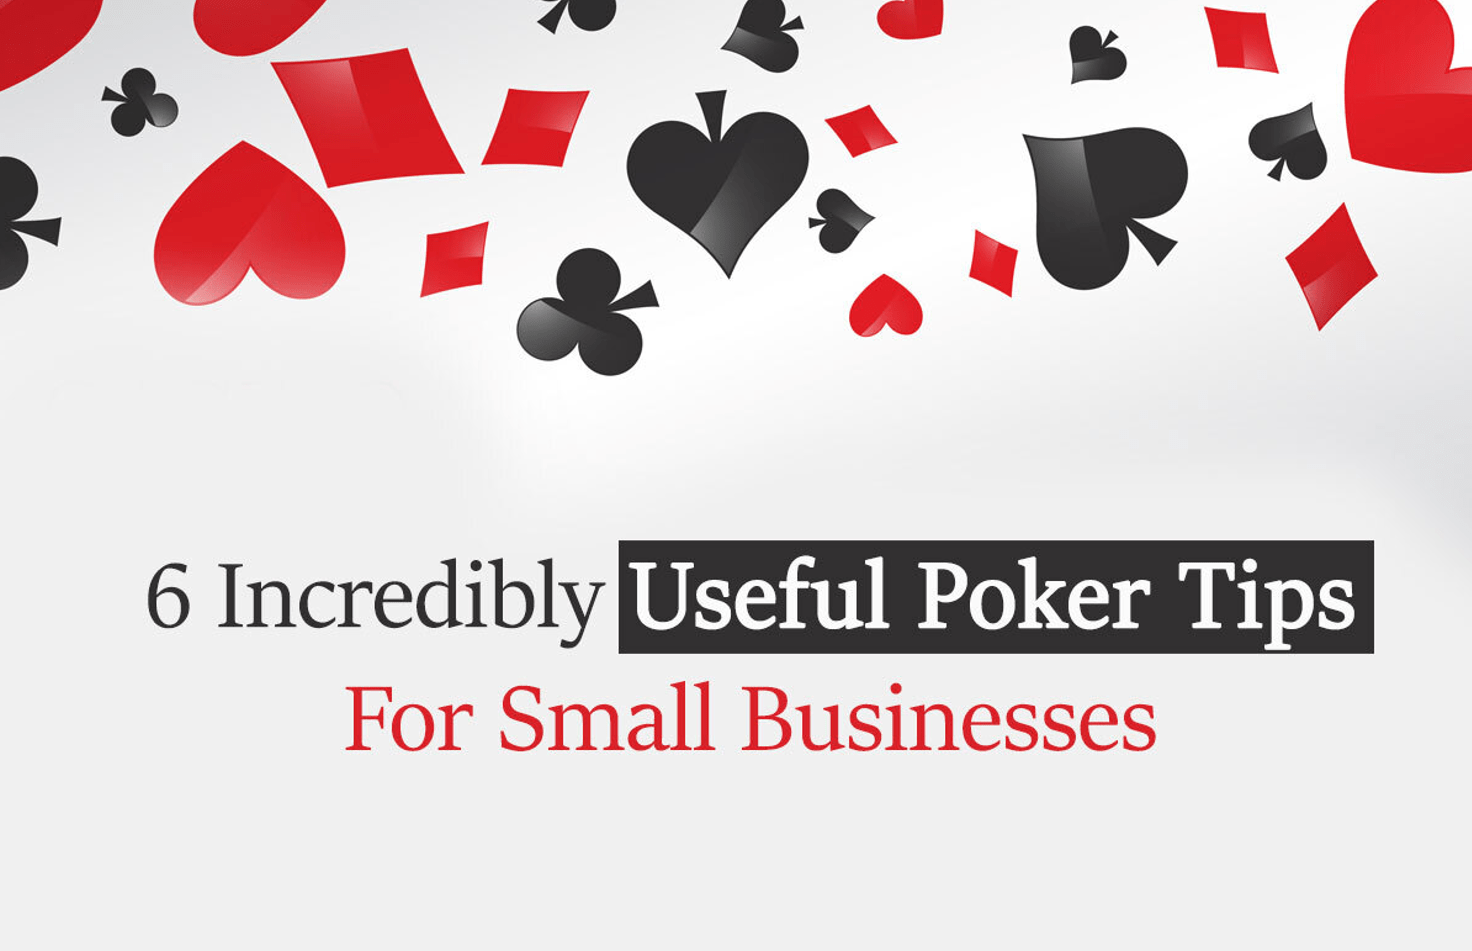 6 Incredibly Useful Poker Tips For Small Businesses